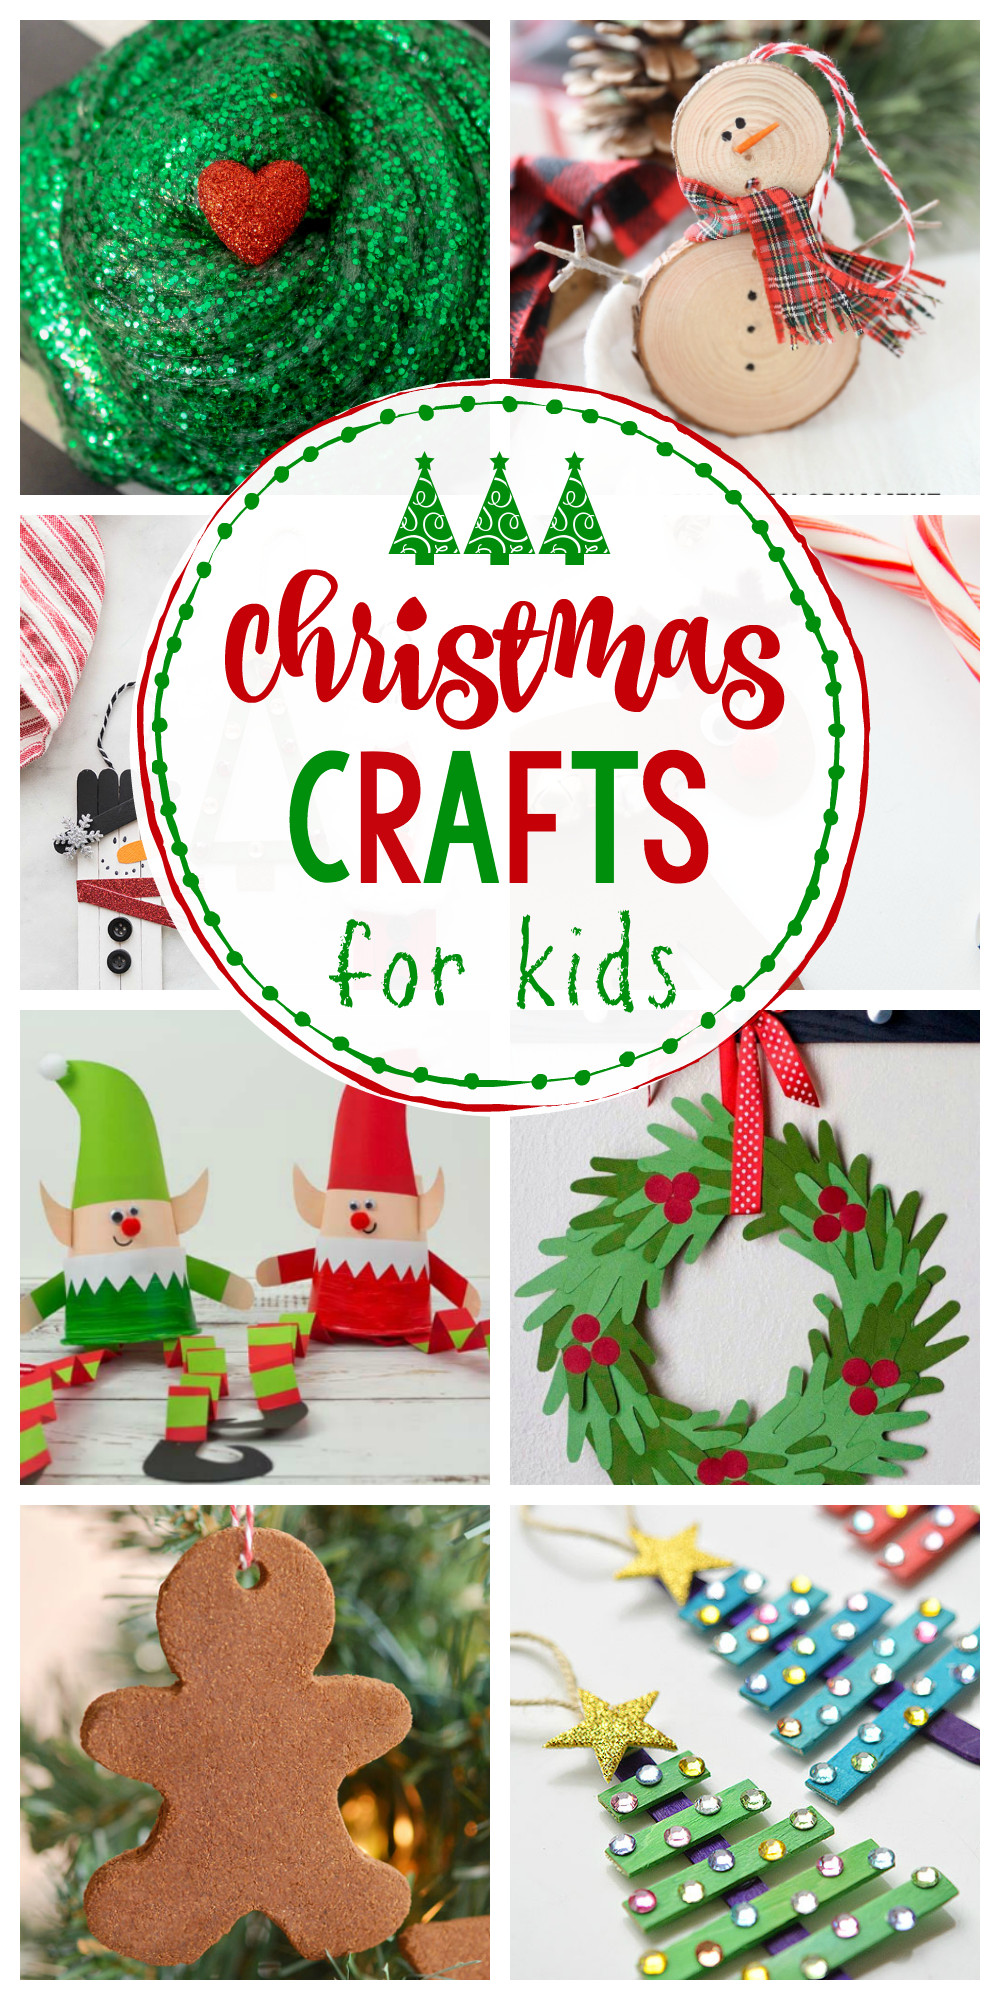 Holiday Projects For Kids
 25 Easy Christmas Crafts for Kids Crazy Little Projects